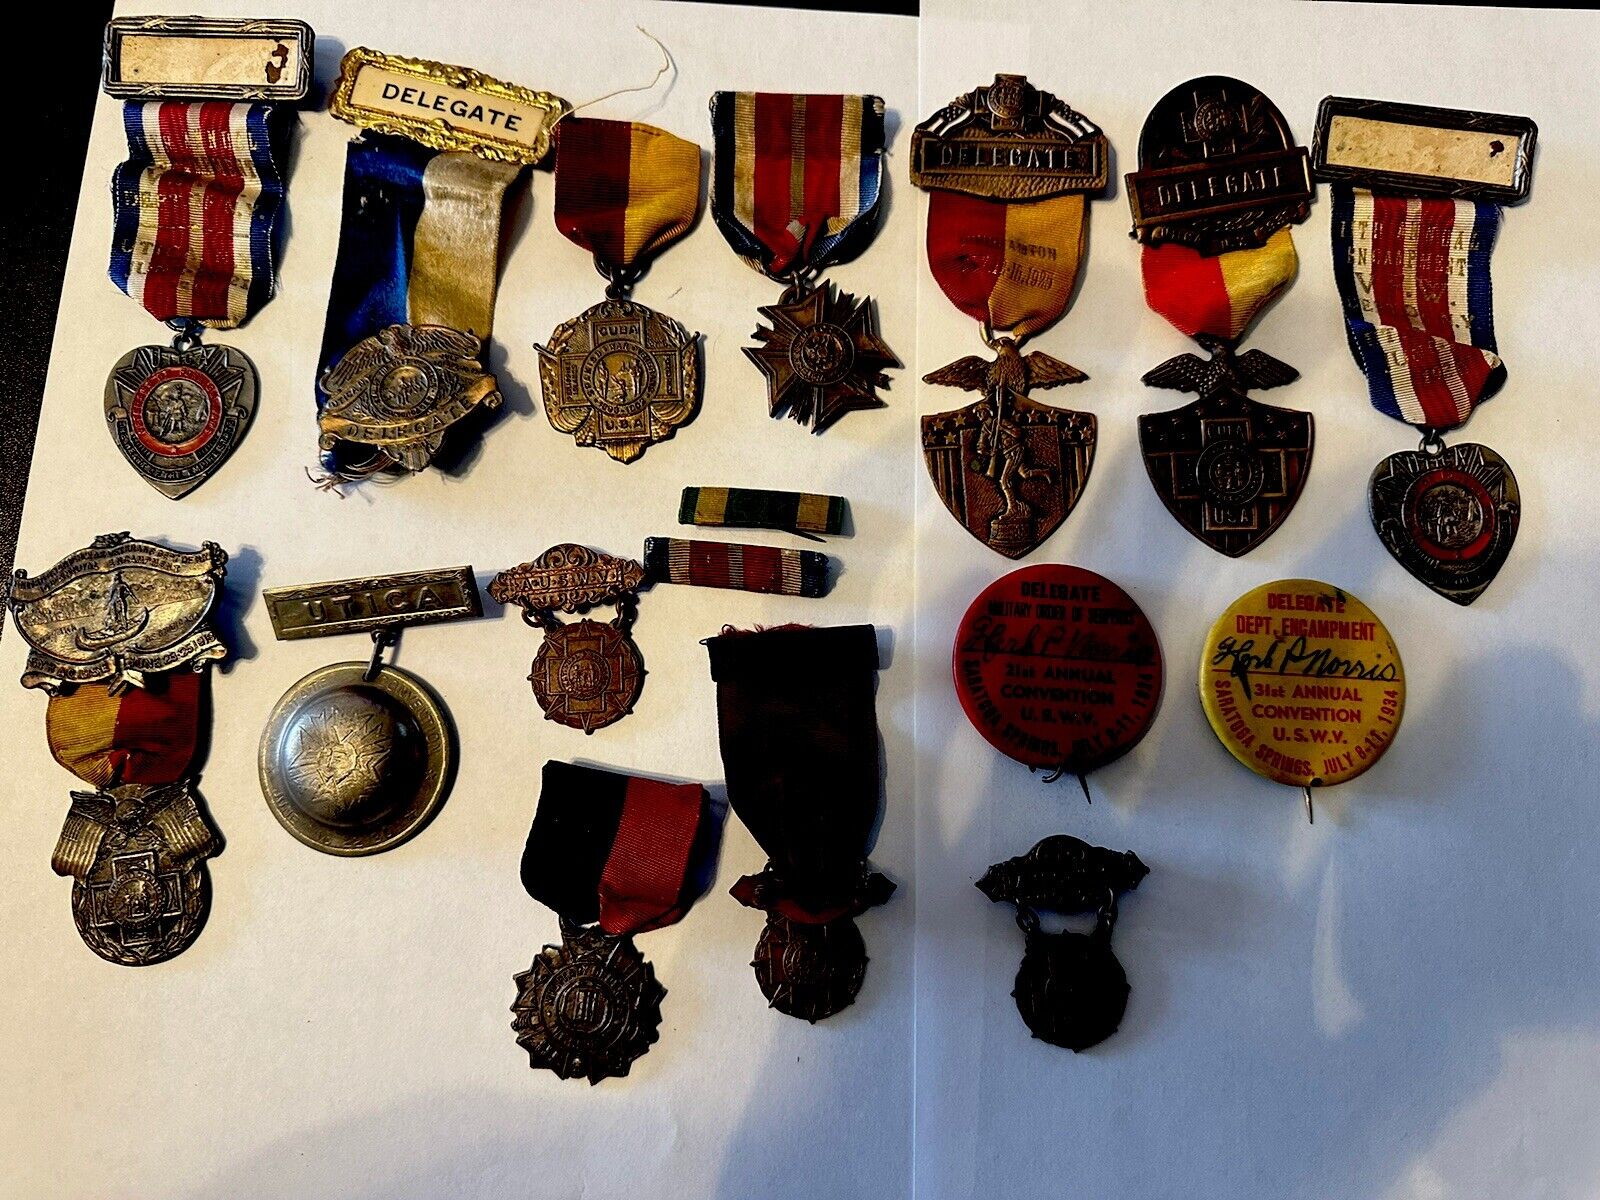 Spanish American War Delegate Medals. Military Order Of The Serpent Badges